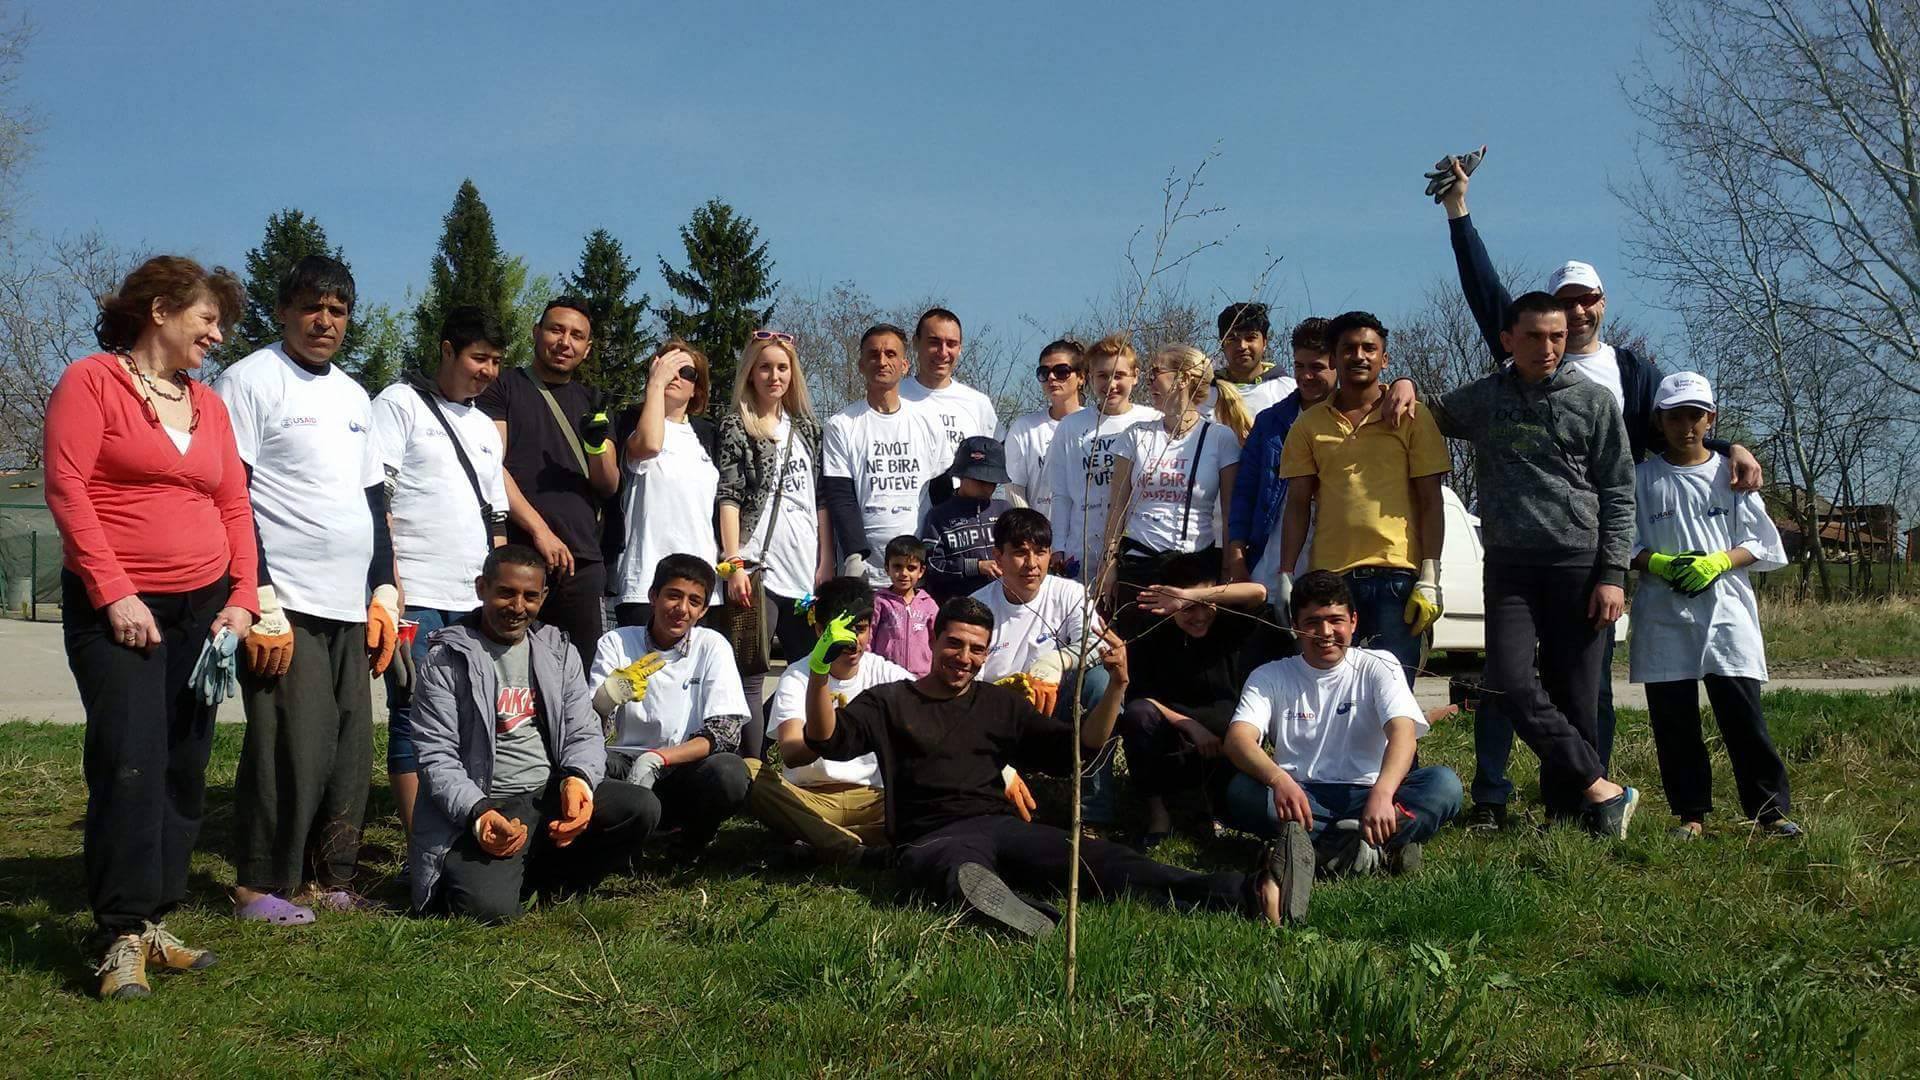  Ana and Vlade Divac Foundation and USAID organized ecological actions